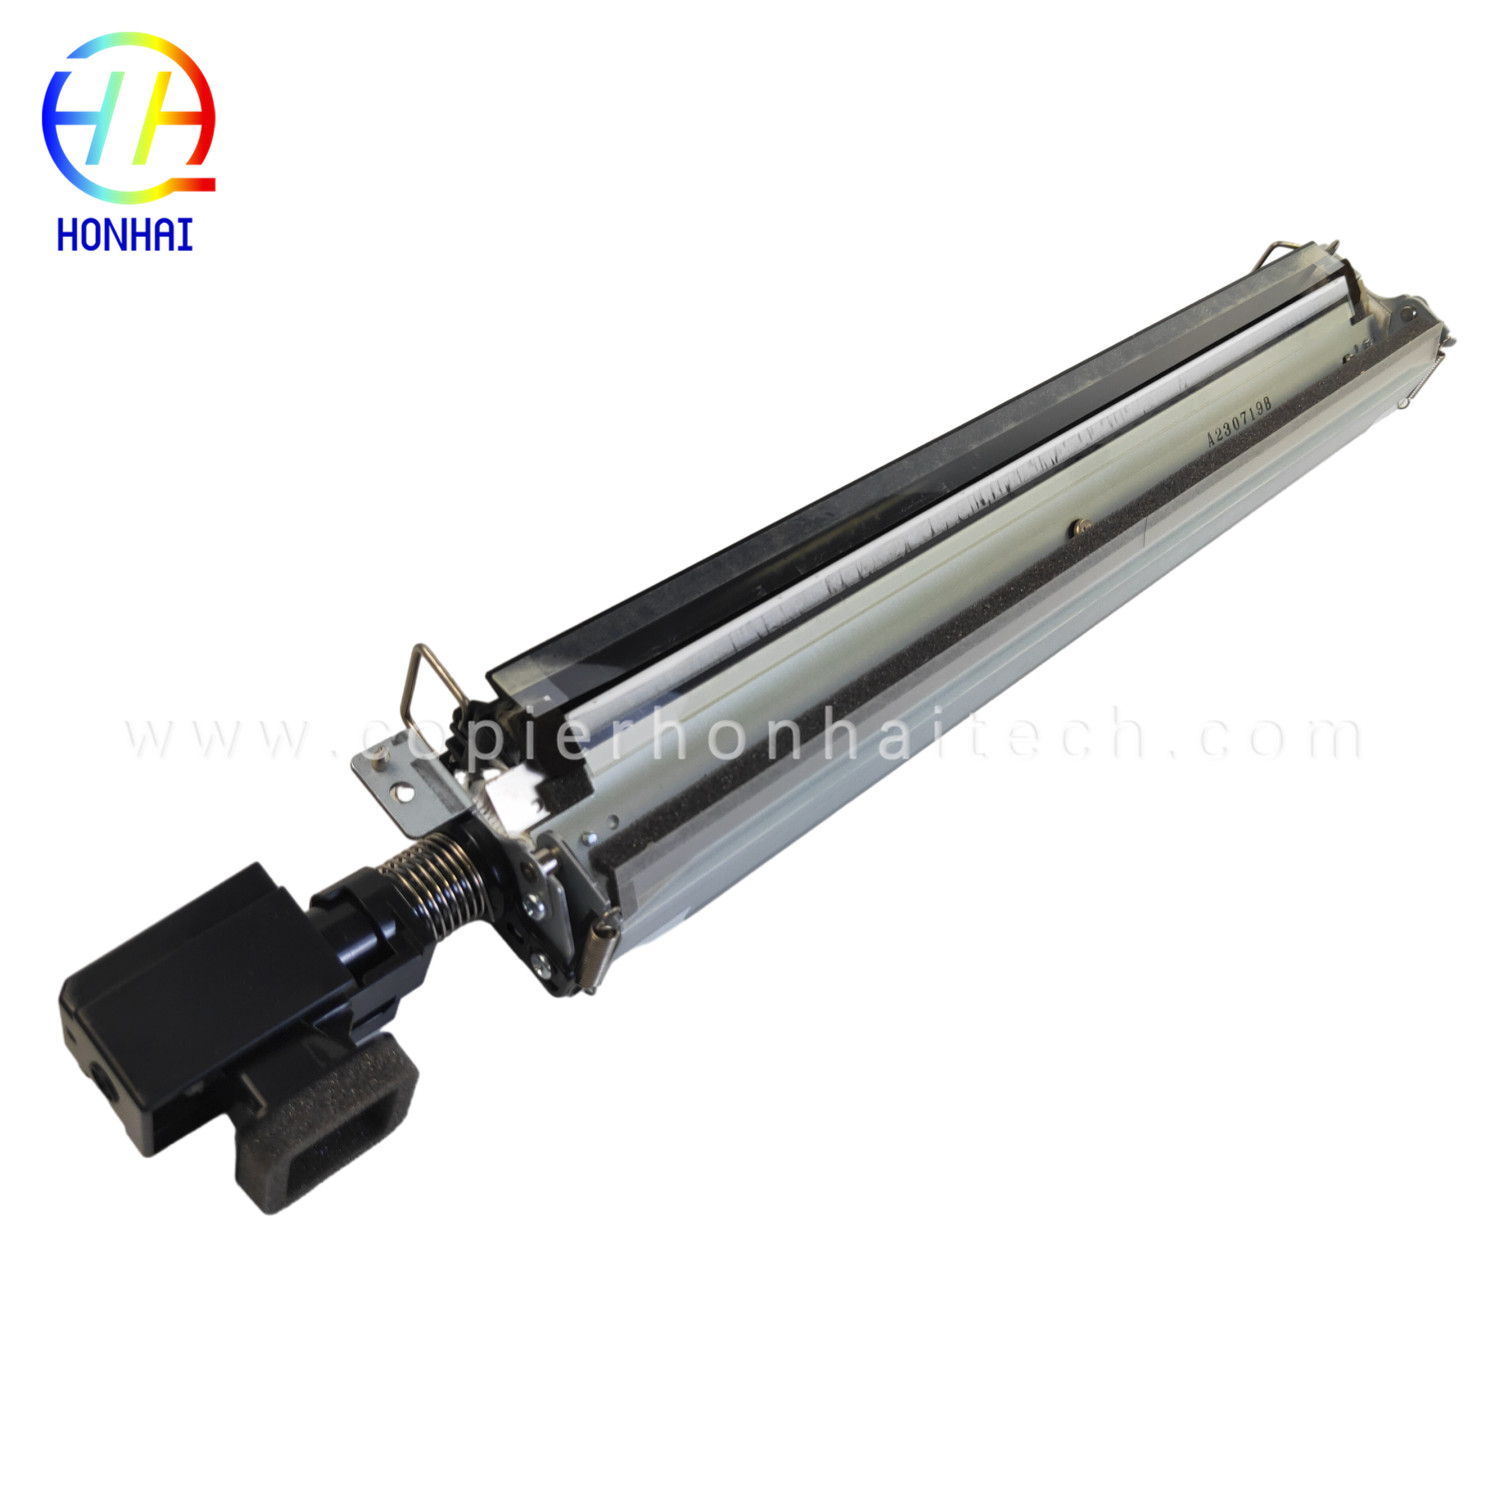 https://www.copierhonhaitech.com/transfer-cleaning-assembly-for-canon-imagerunner-advance-c5030-c5035-c5040-c5045-c5051-c5235-c5240-c5250-c5255-fm4-7244-fm4-2044-fm 7244-010-fm4-7245-000-fm3-5932-000-transfer-cleaning-unit-product/